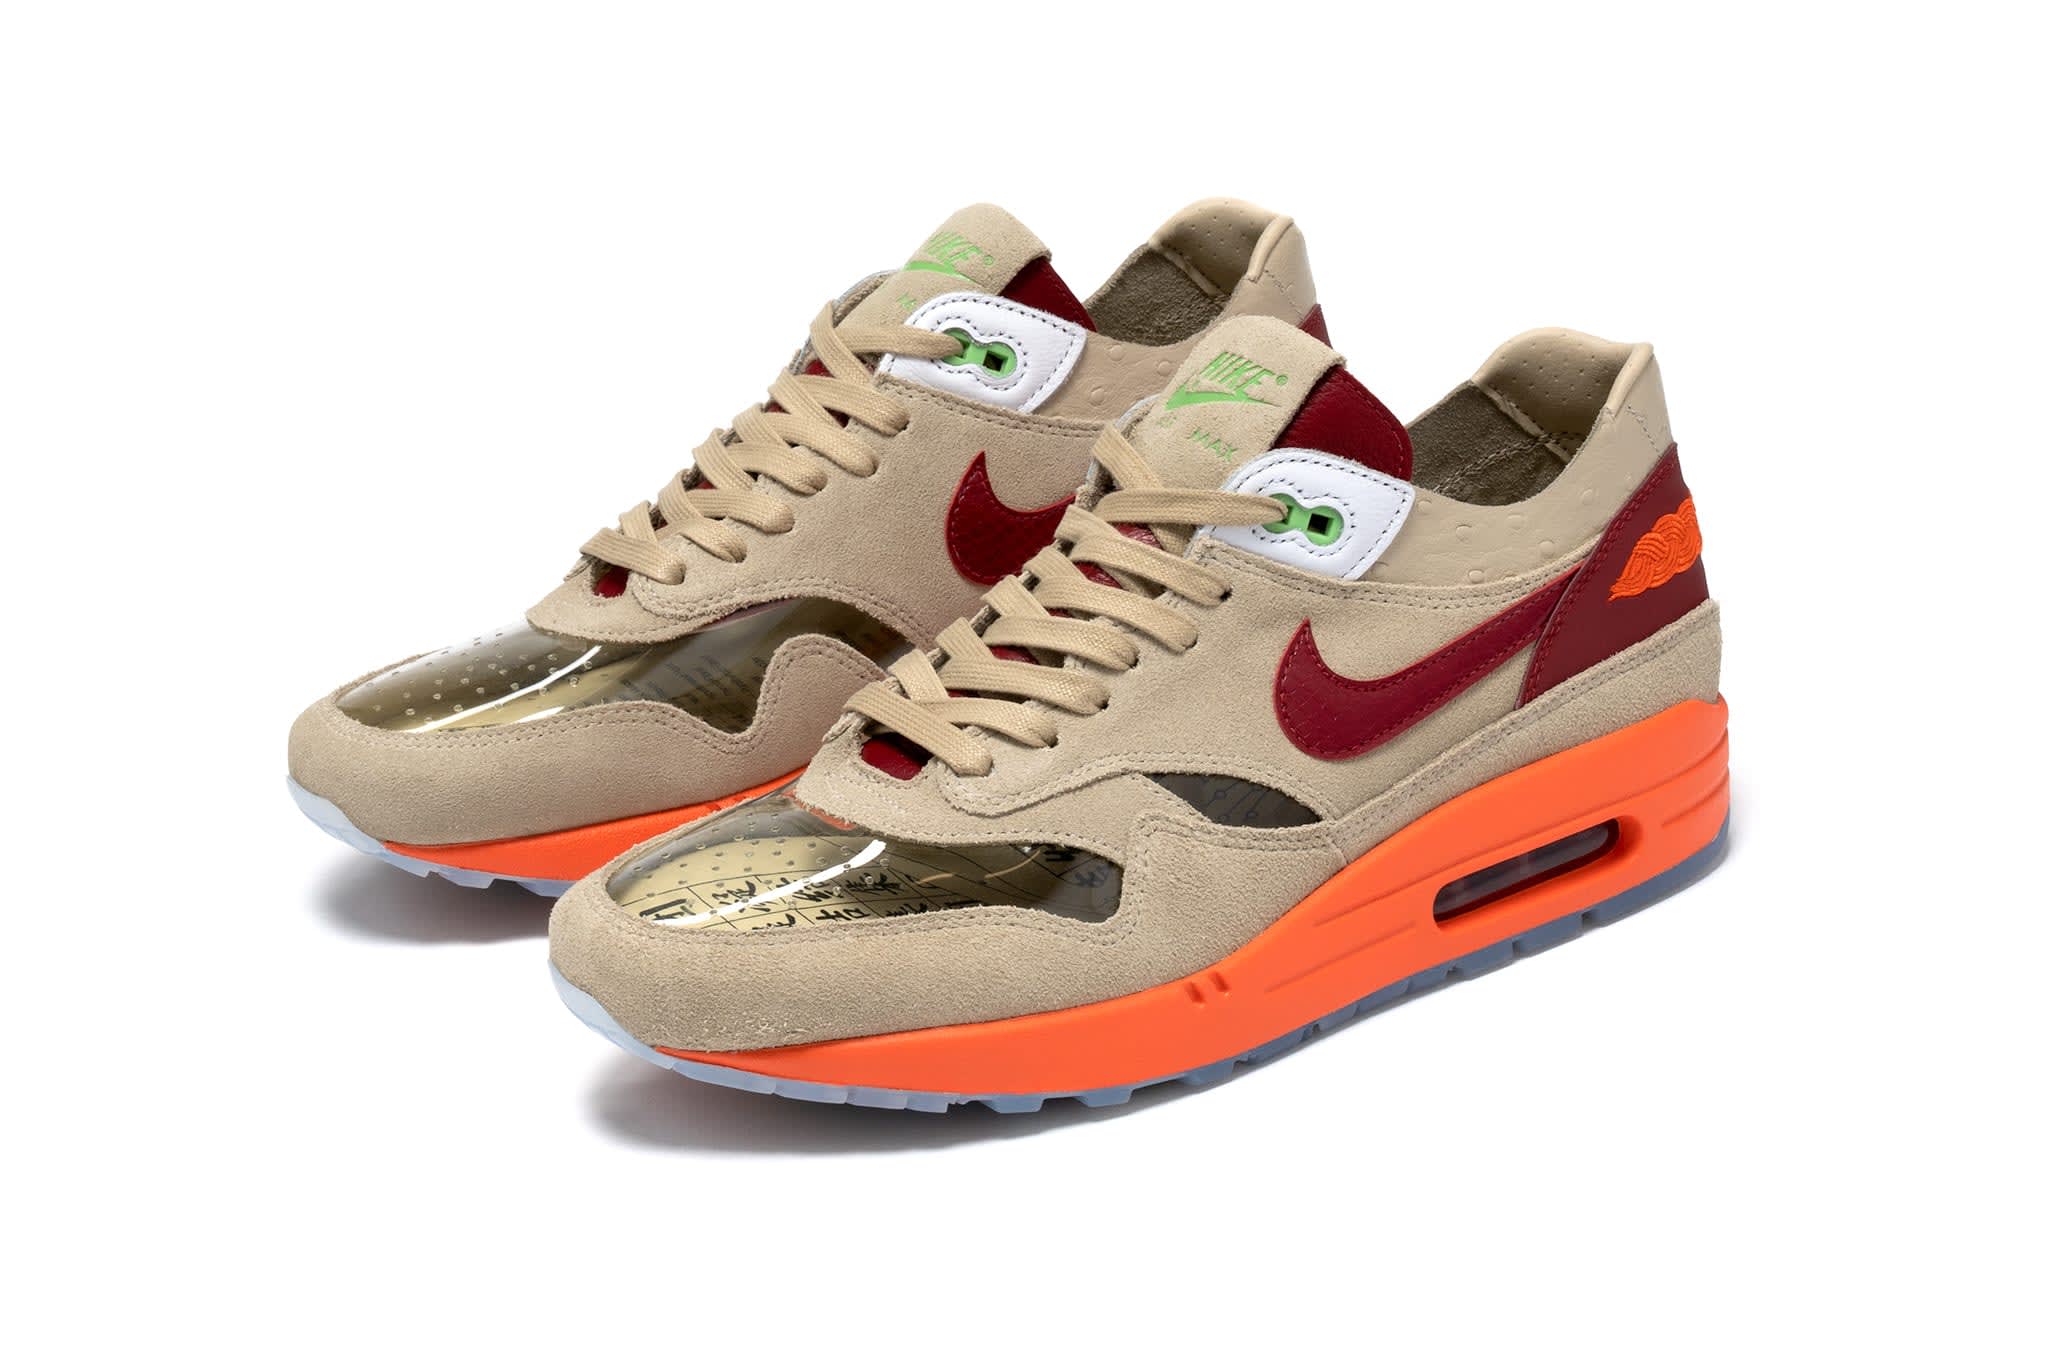 when was the first air max released